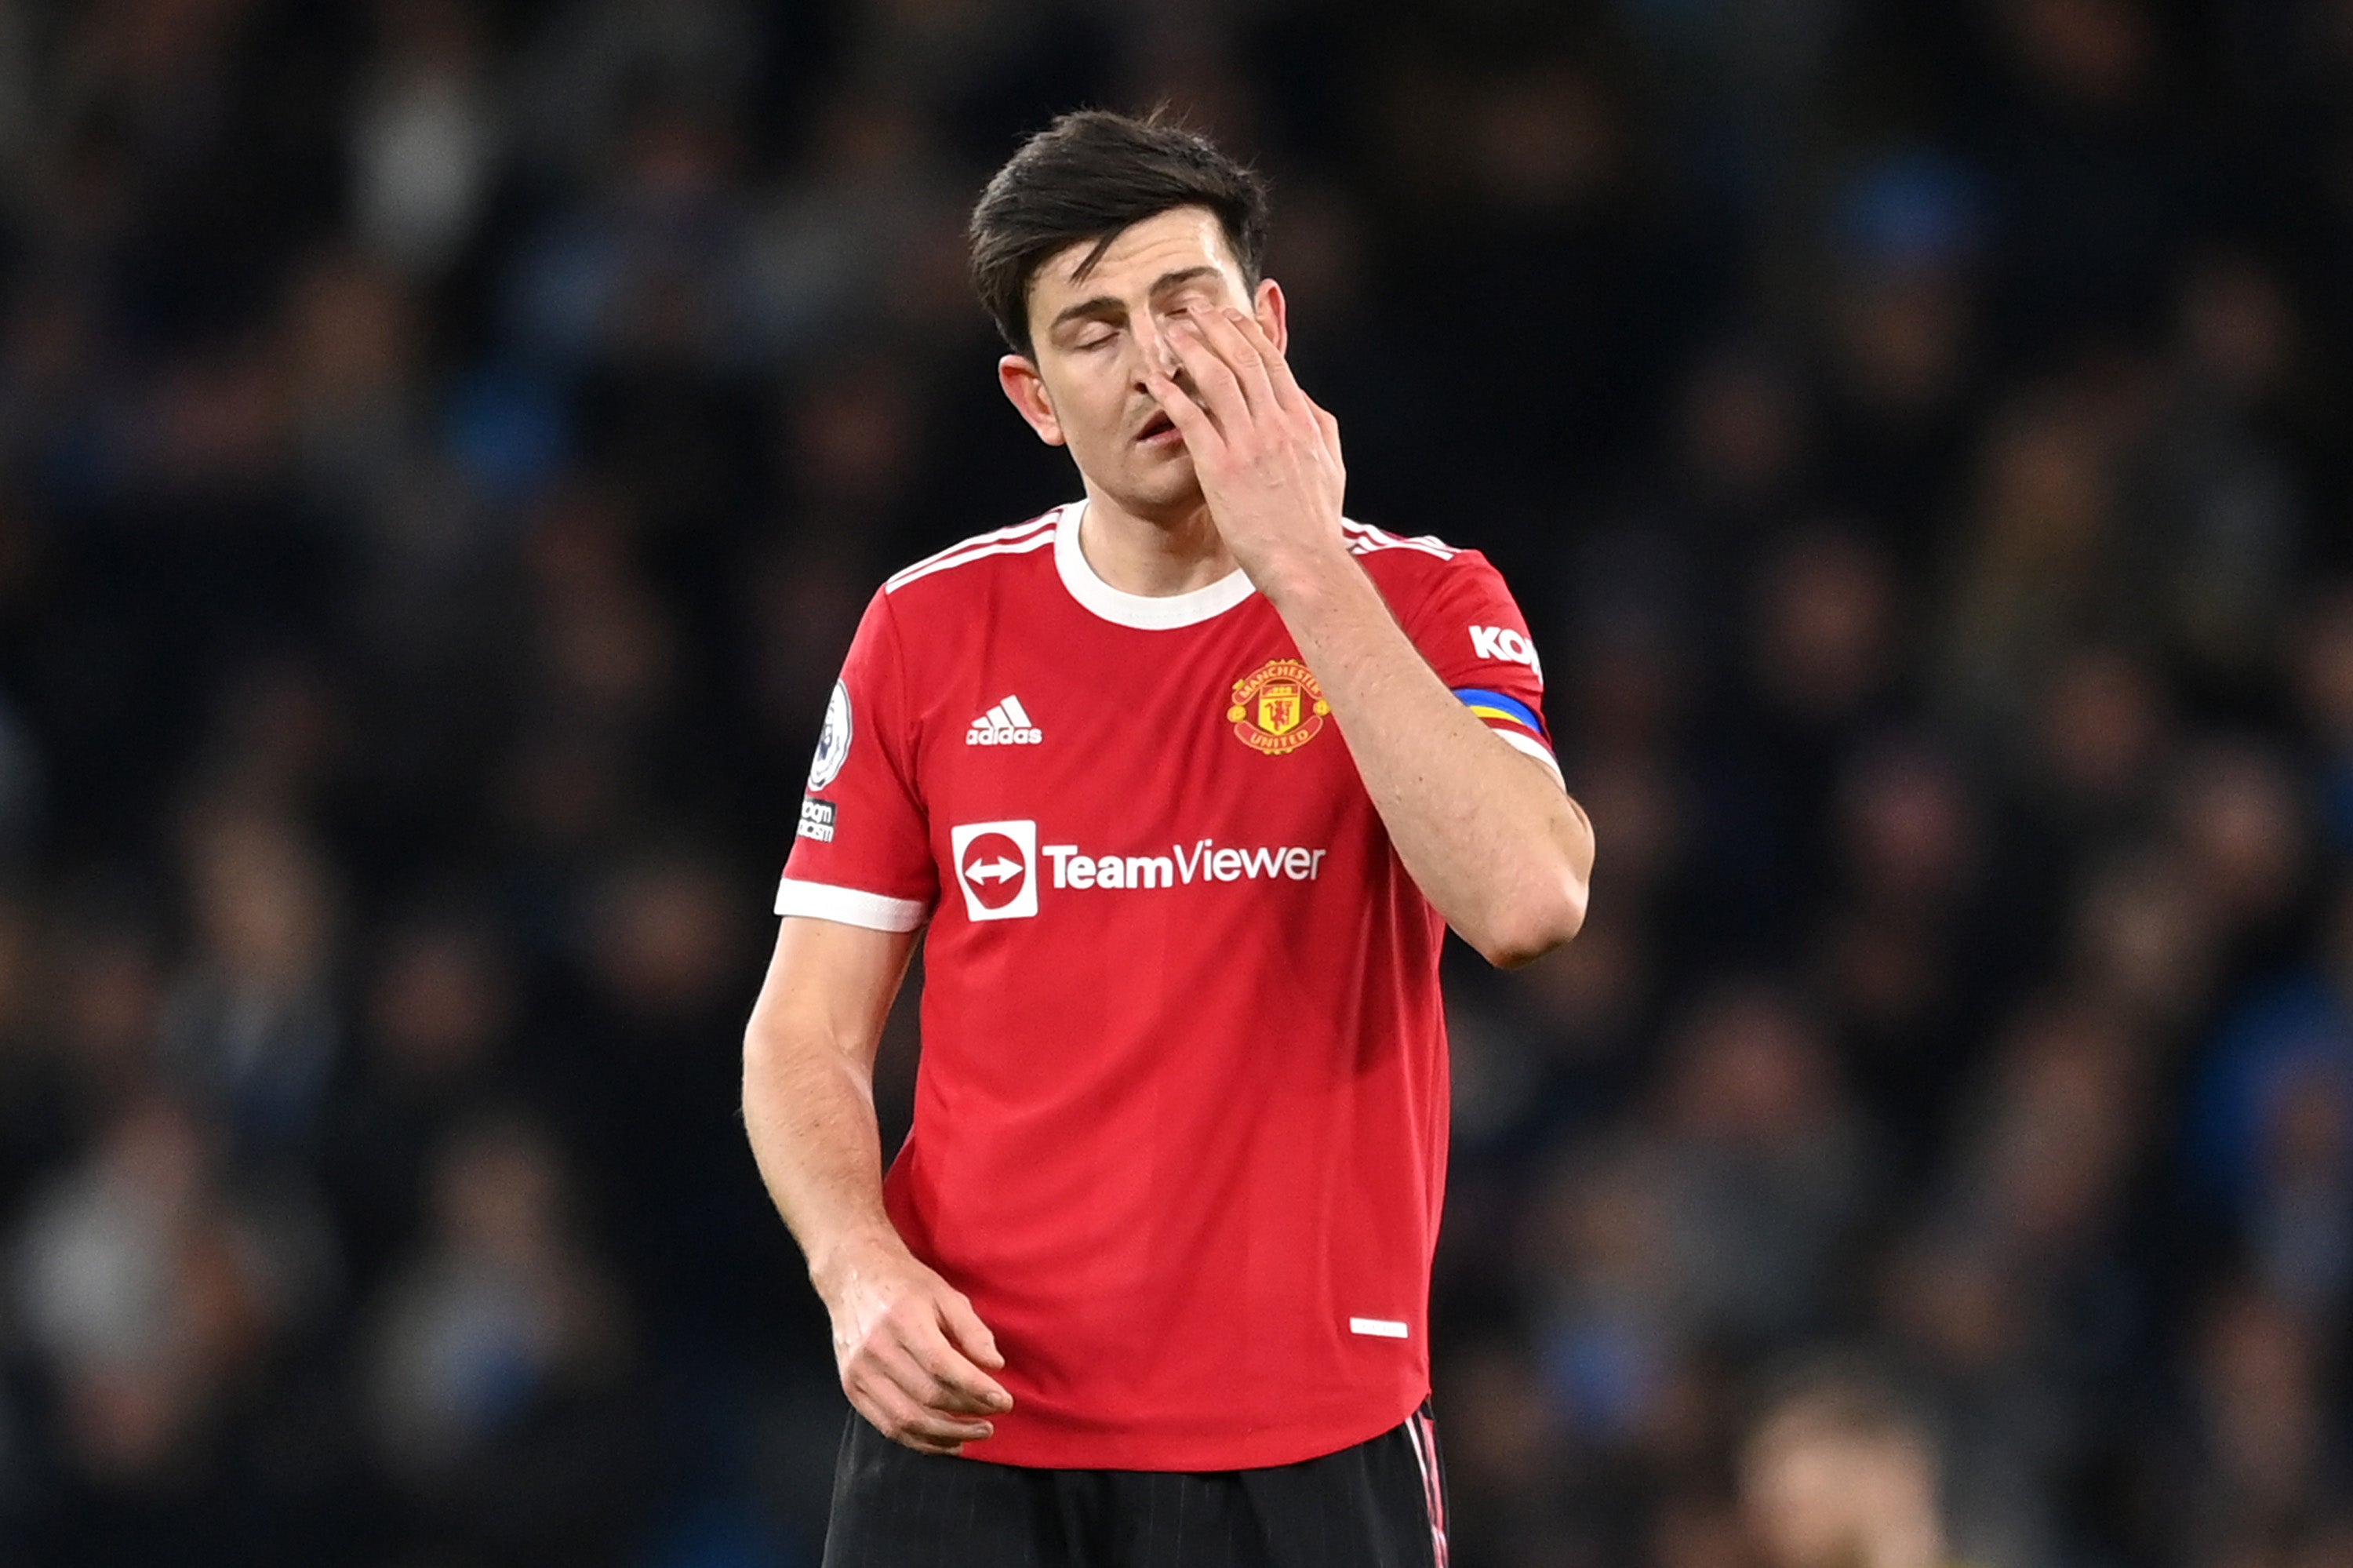 Maguire has been stripped of the captaincy ahead of a potential United exit